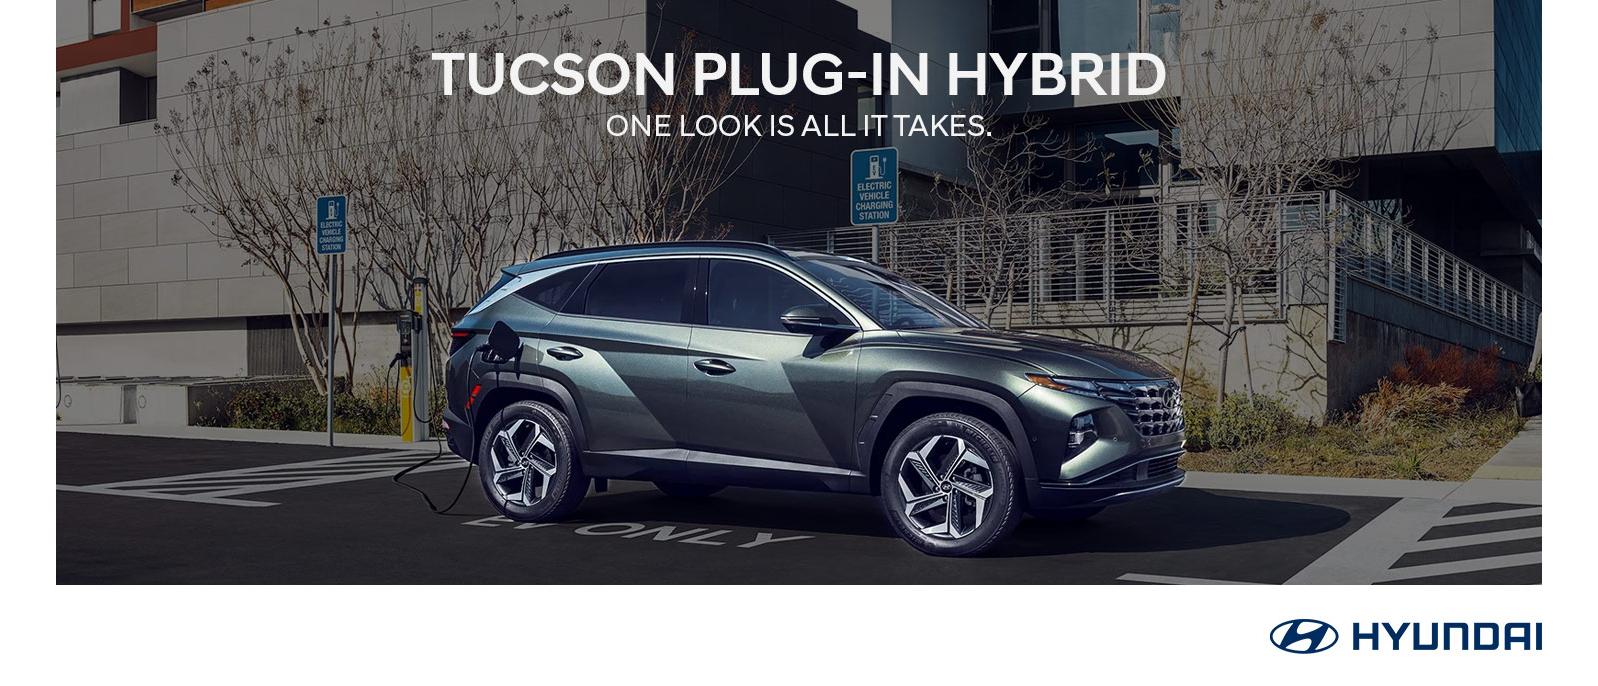 2023 Hyundai TUCSON Plug-in Hybrid parked with buildings in background.